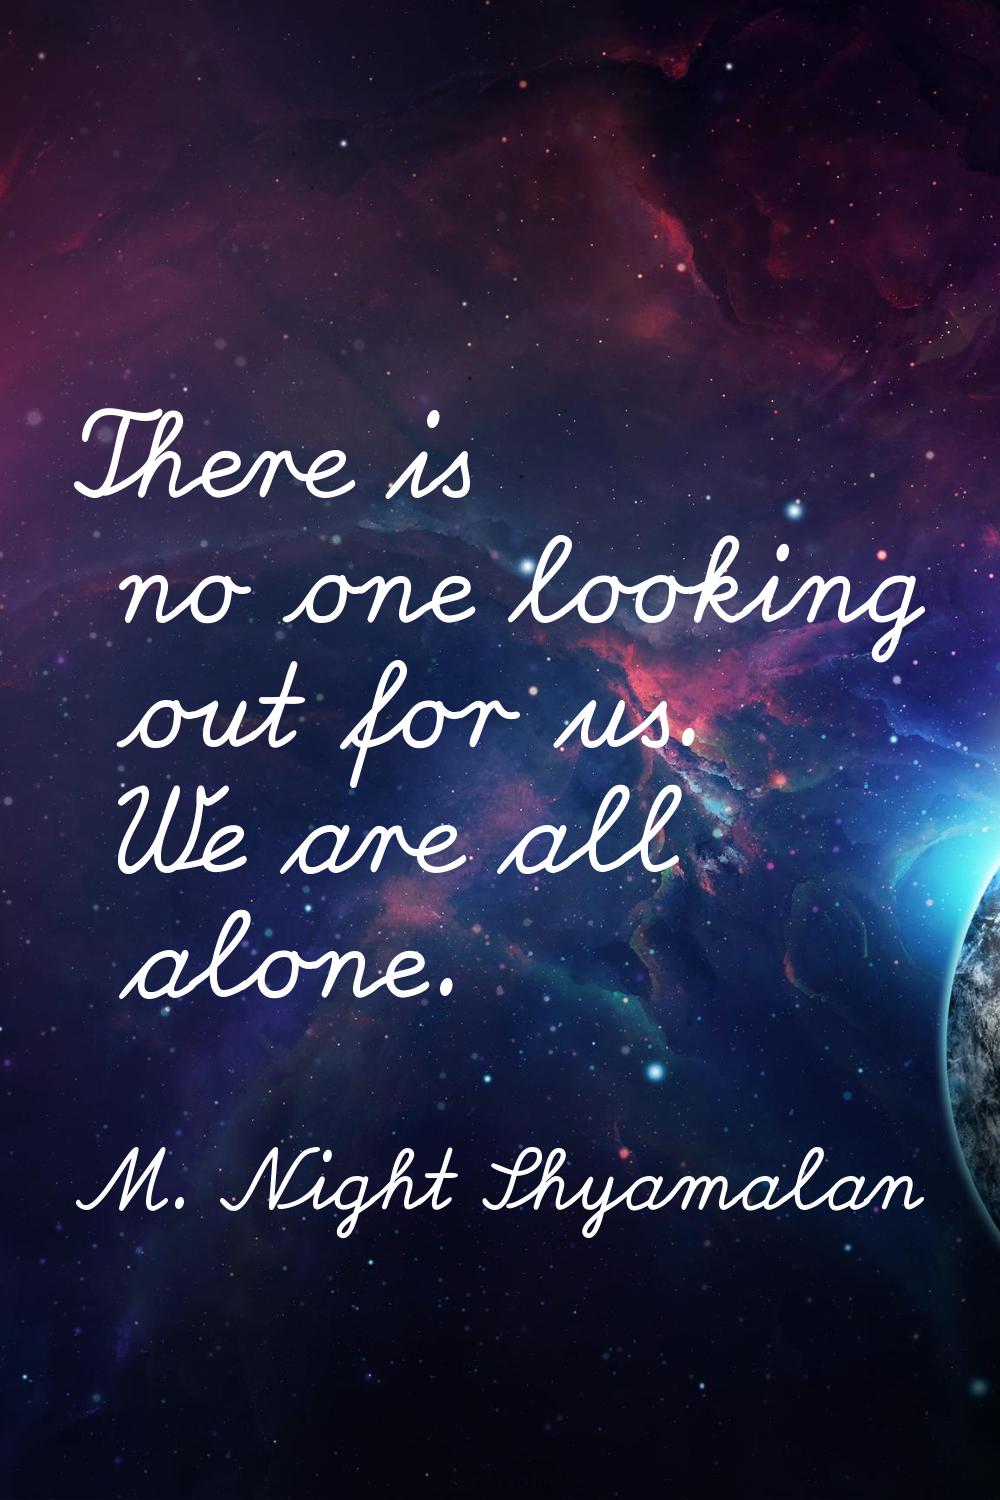 There is no one looking out for us. We are all alone.